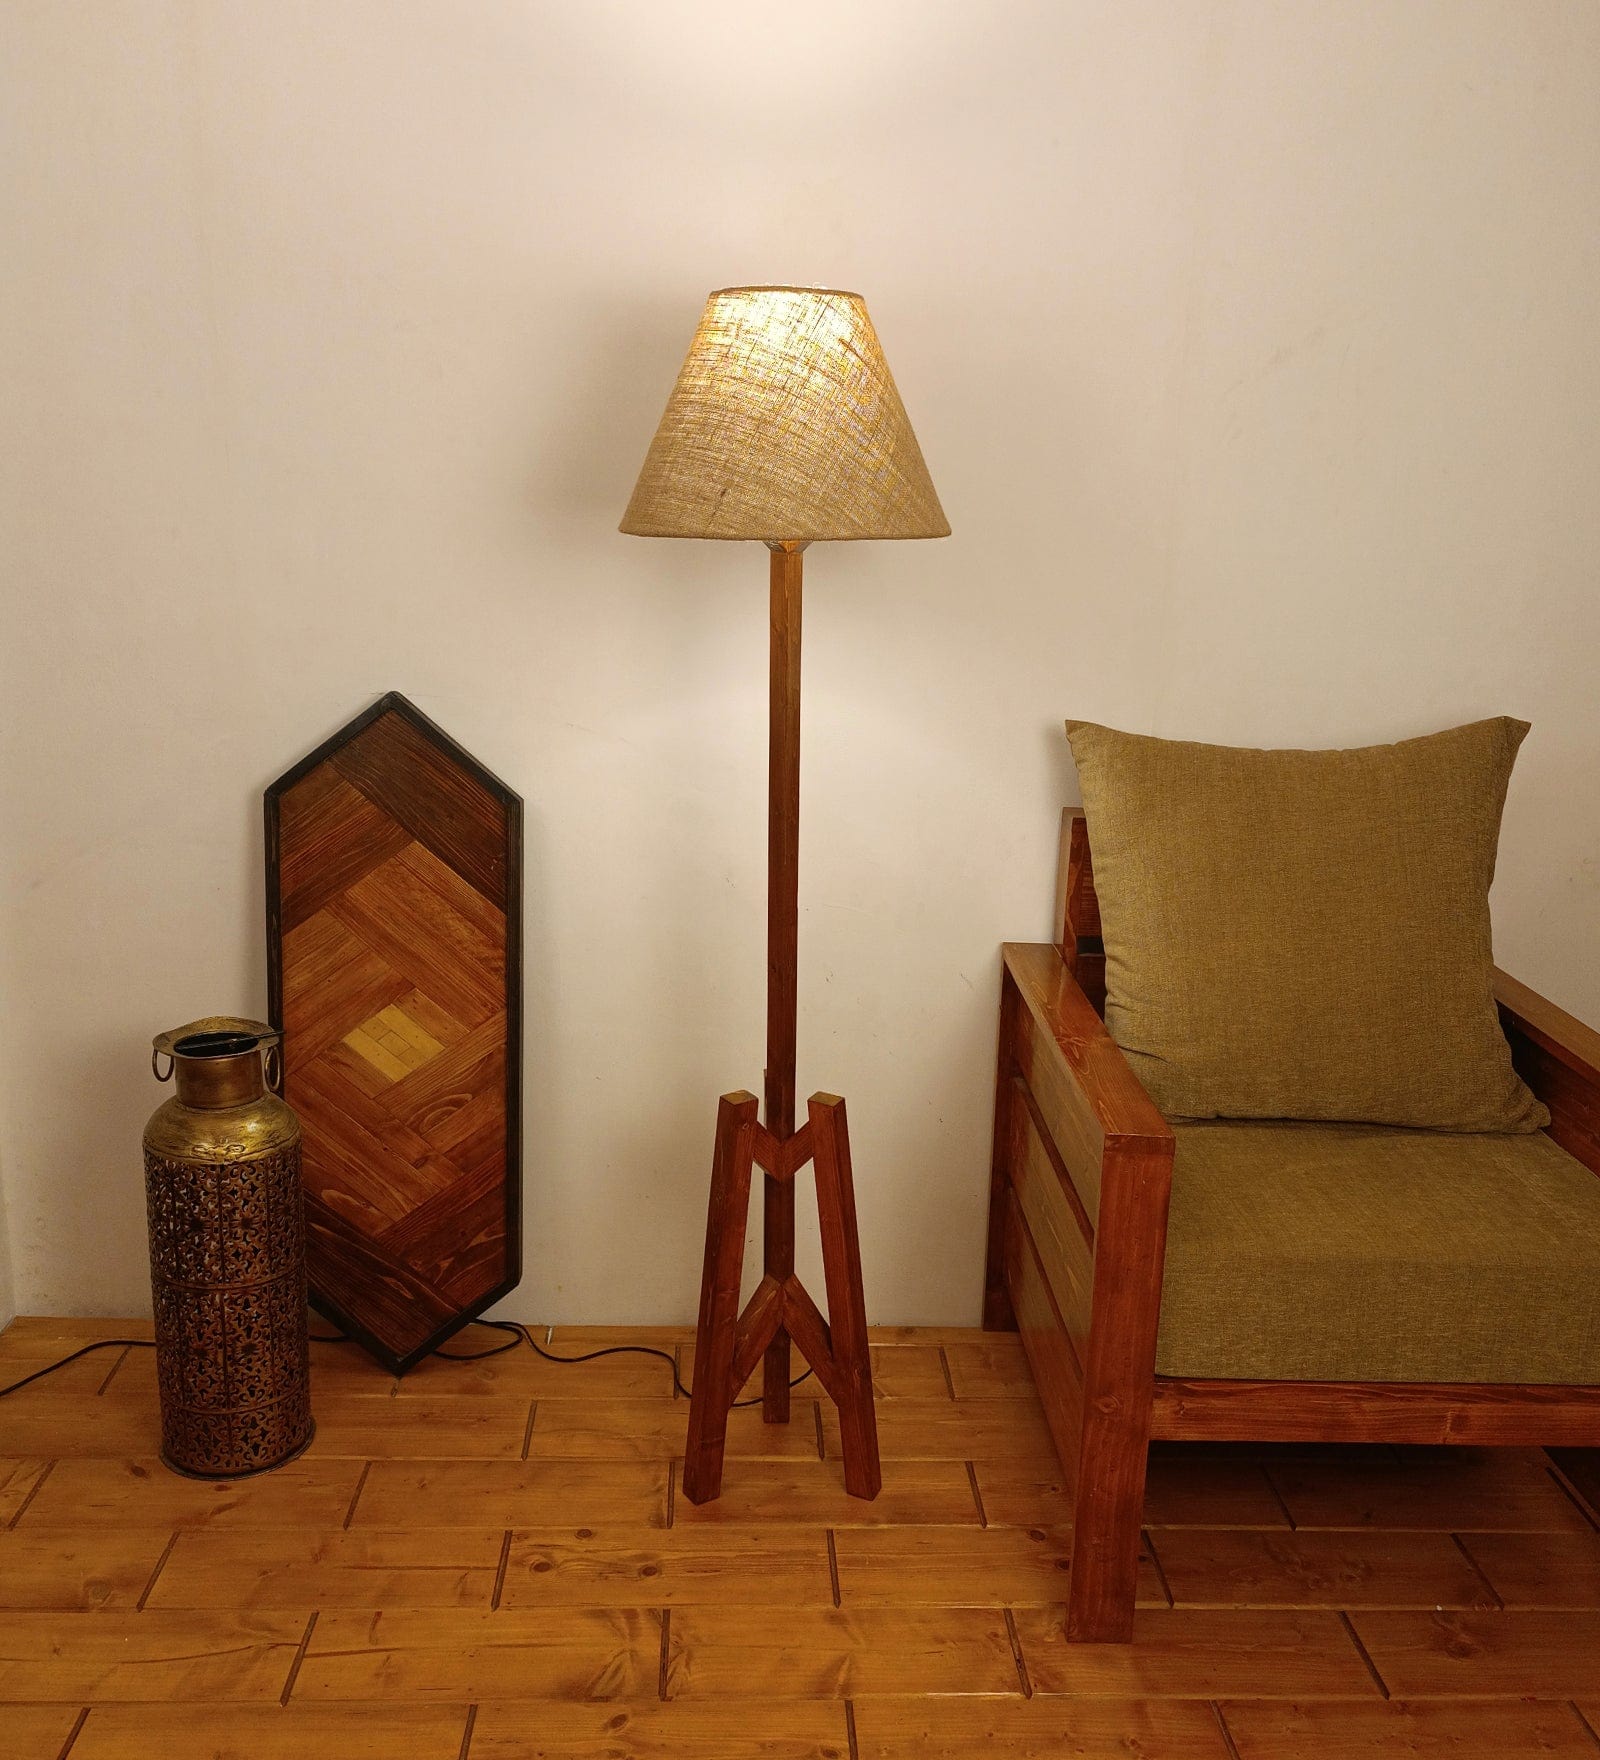 Troika Wooden Floor Lamp with Brown Base and Premium Beige Fabric Lampshade (BULB NOT INCLUDED)